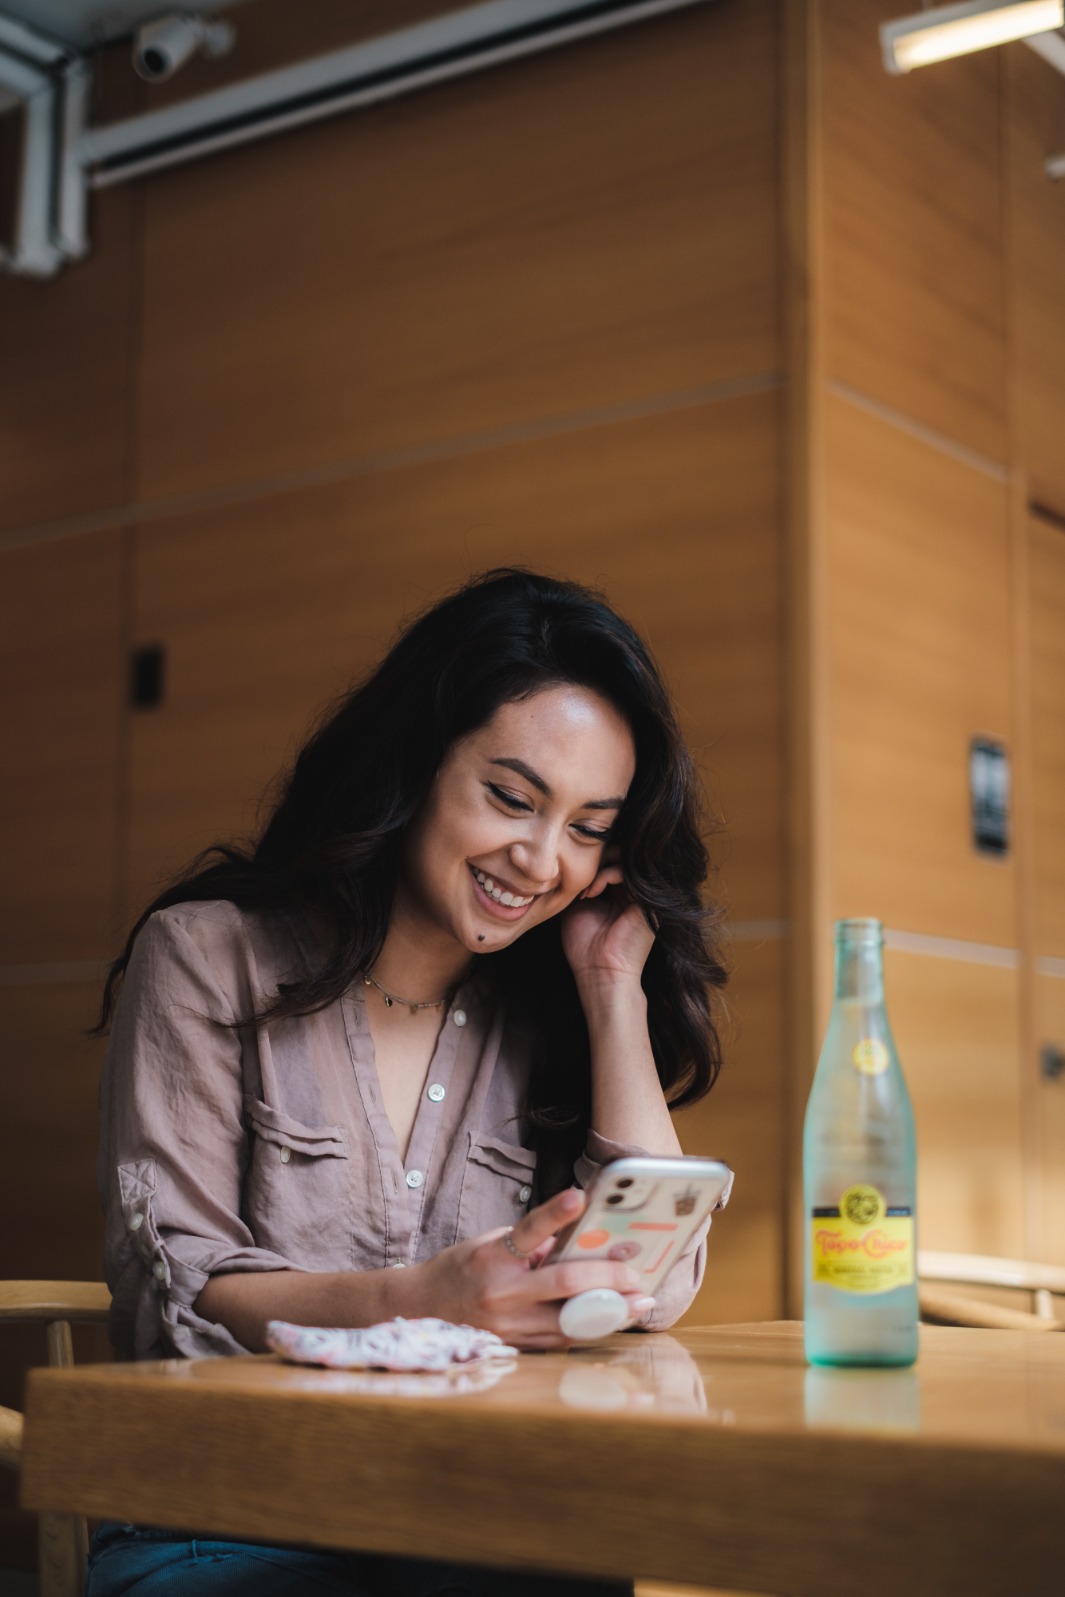 Image of a woman watching her phone smiling.